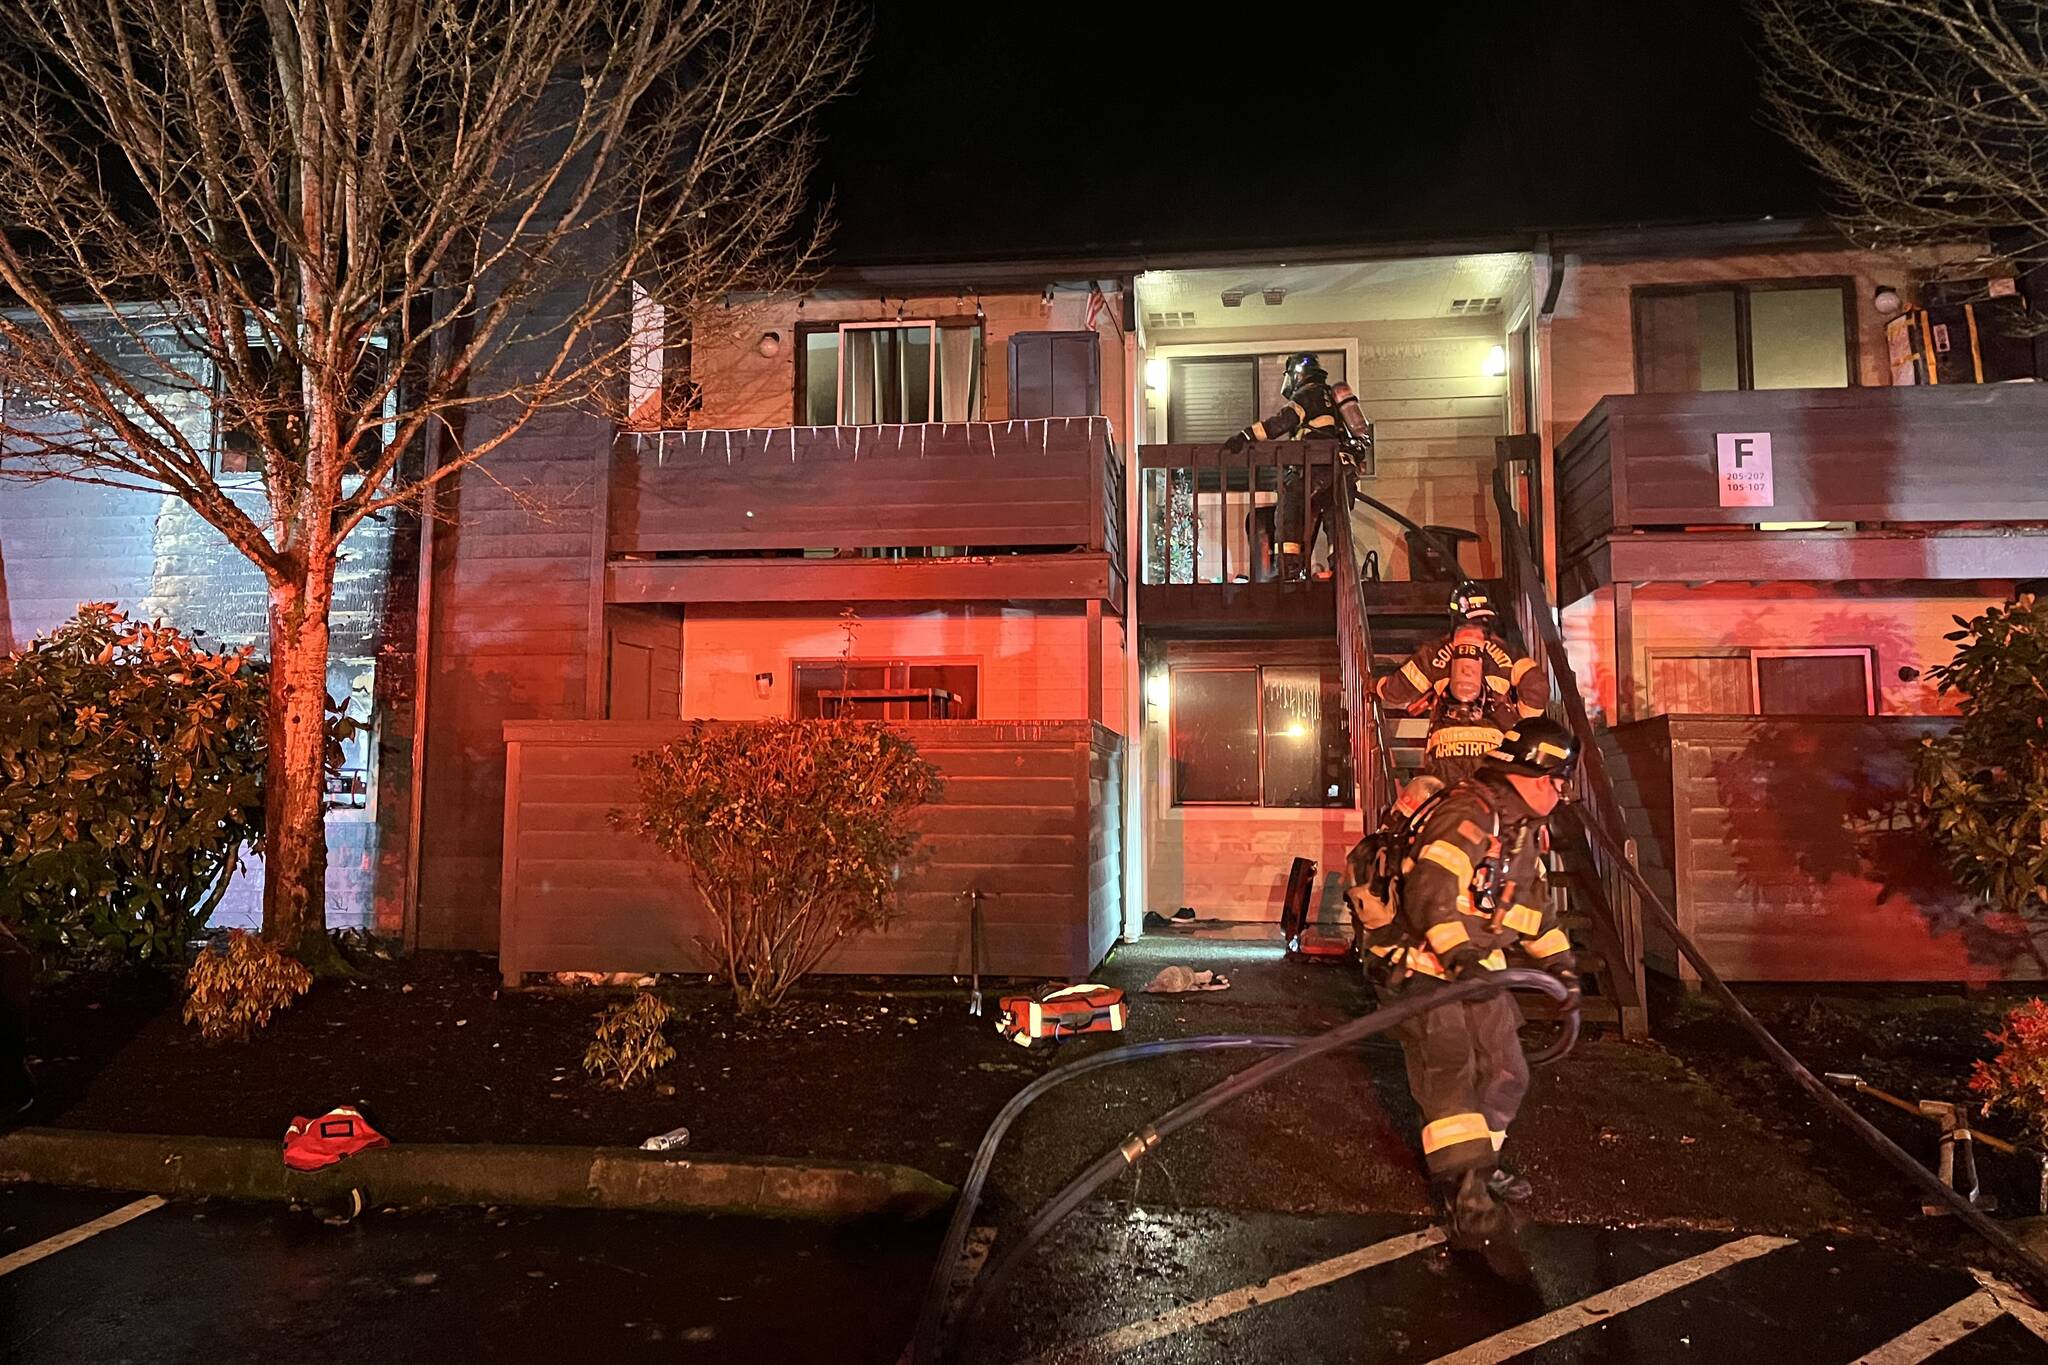 A man was injured in a fire early Saturday morning at the Ardent Apartments in Mill Creek, Washington. (South County Fire)